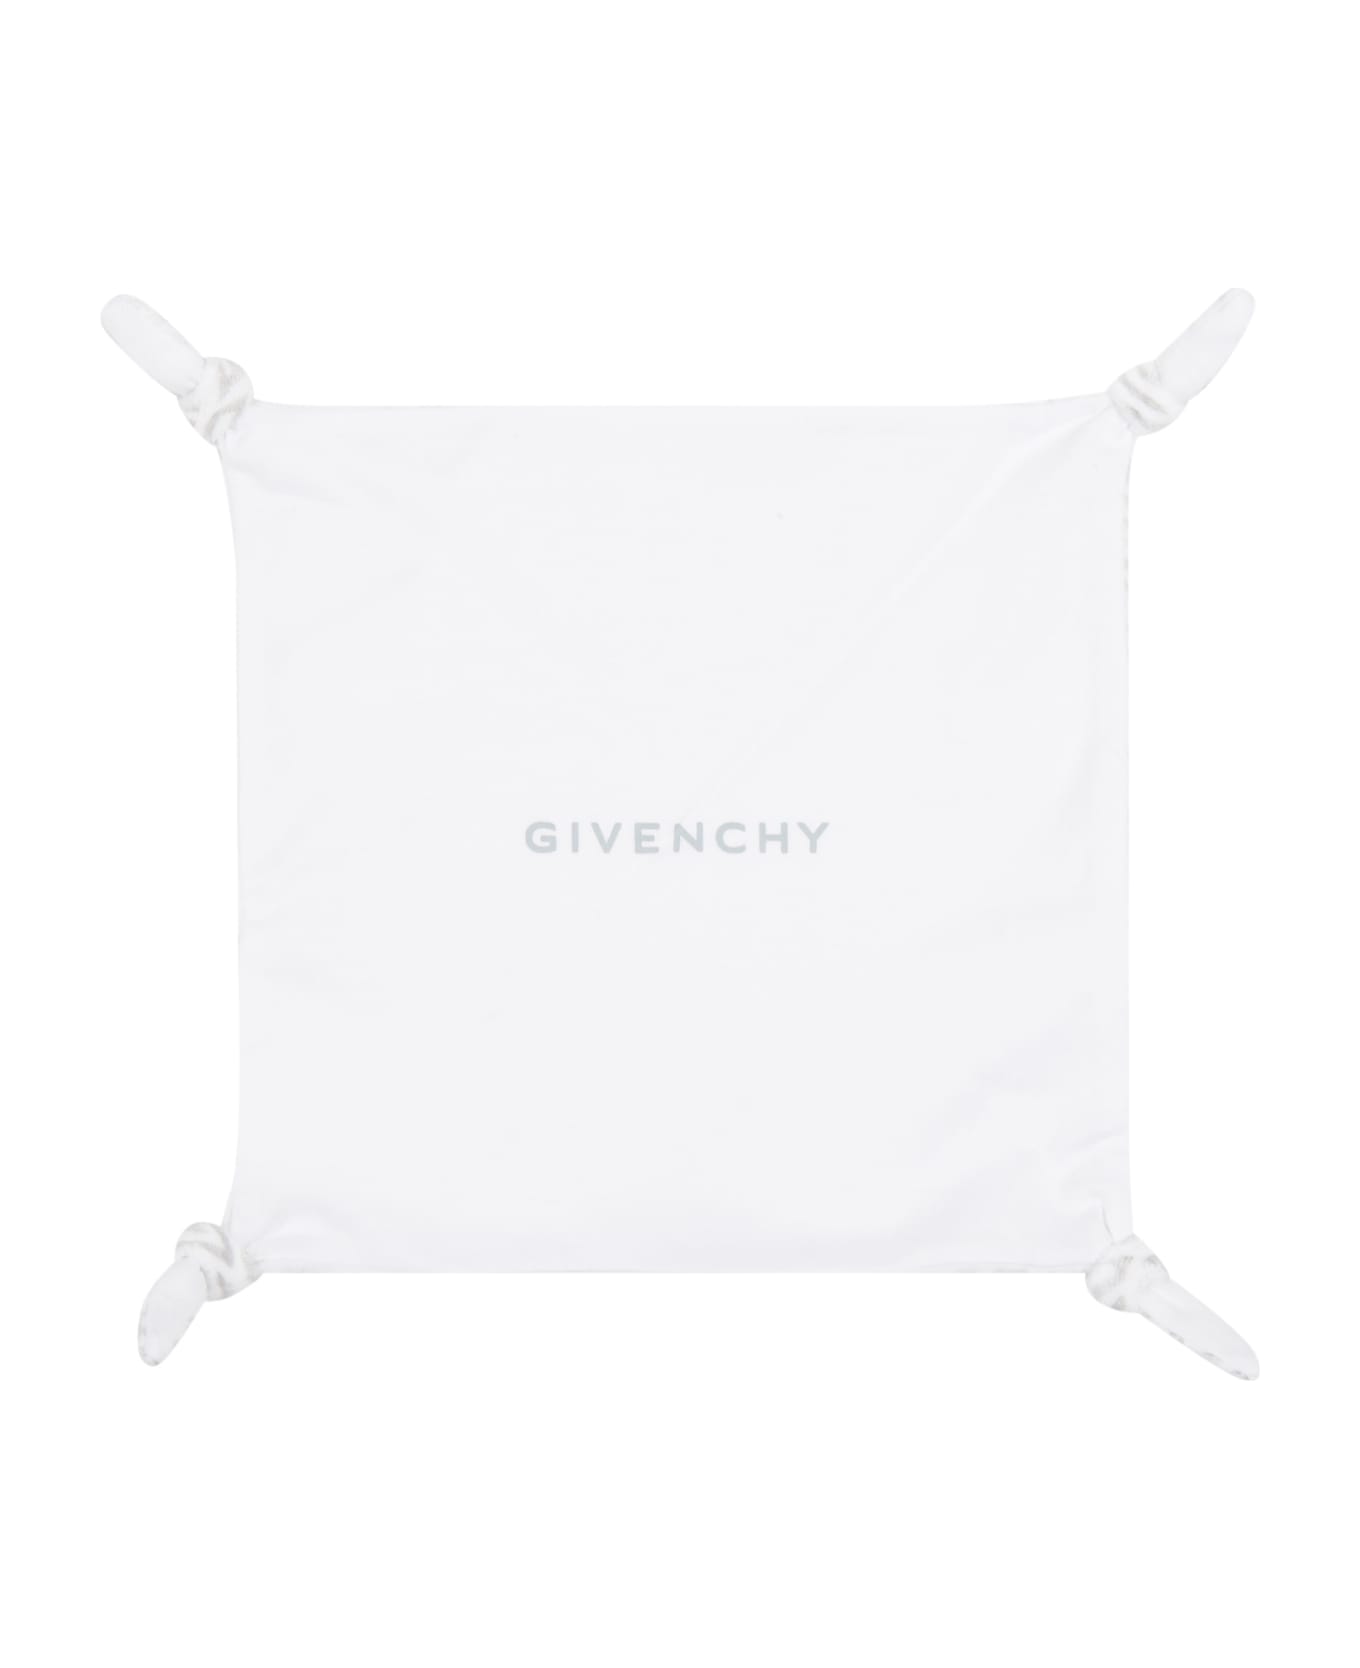 Givenchy White Set For Baby Kids With Logos - Grey